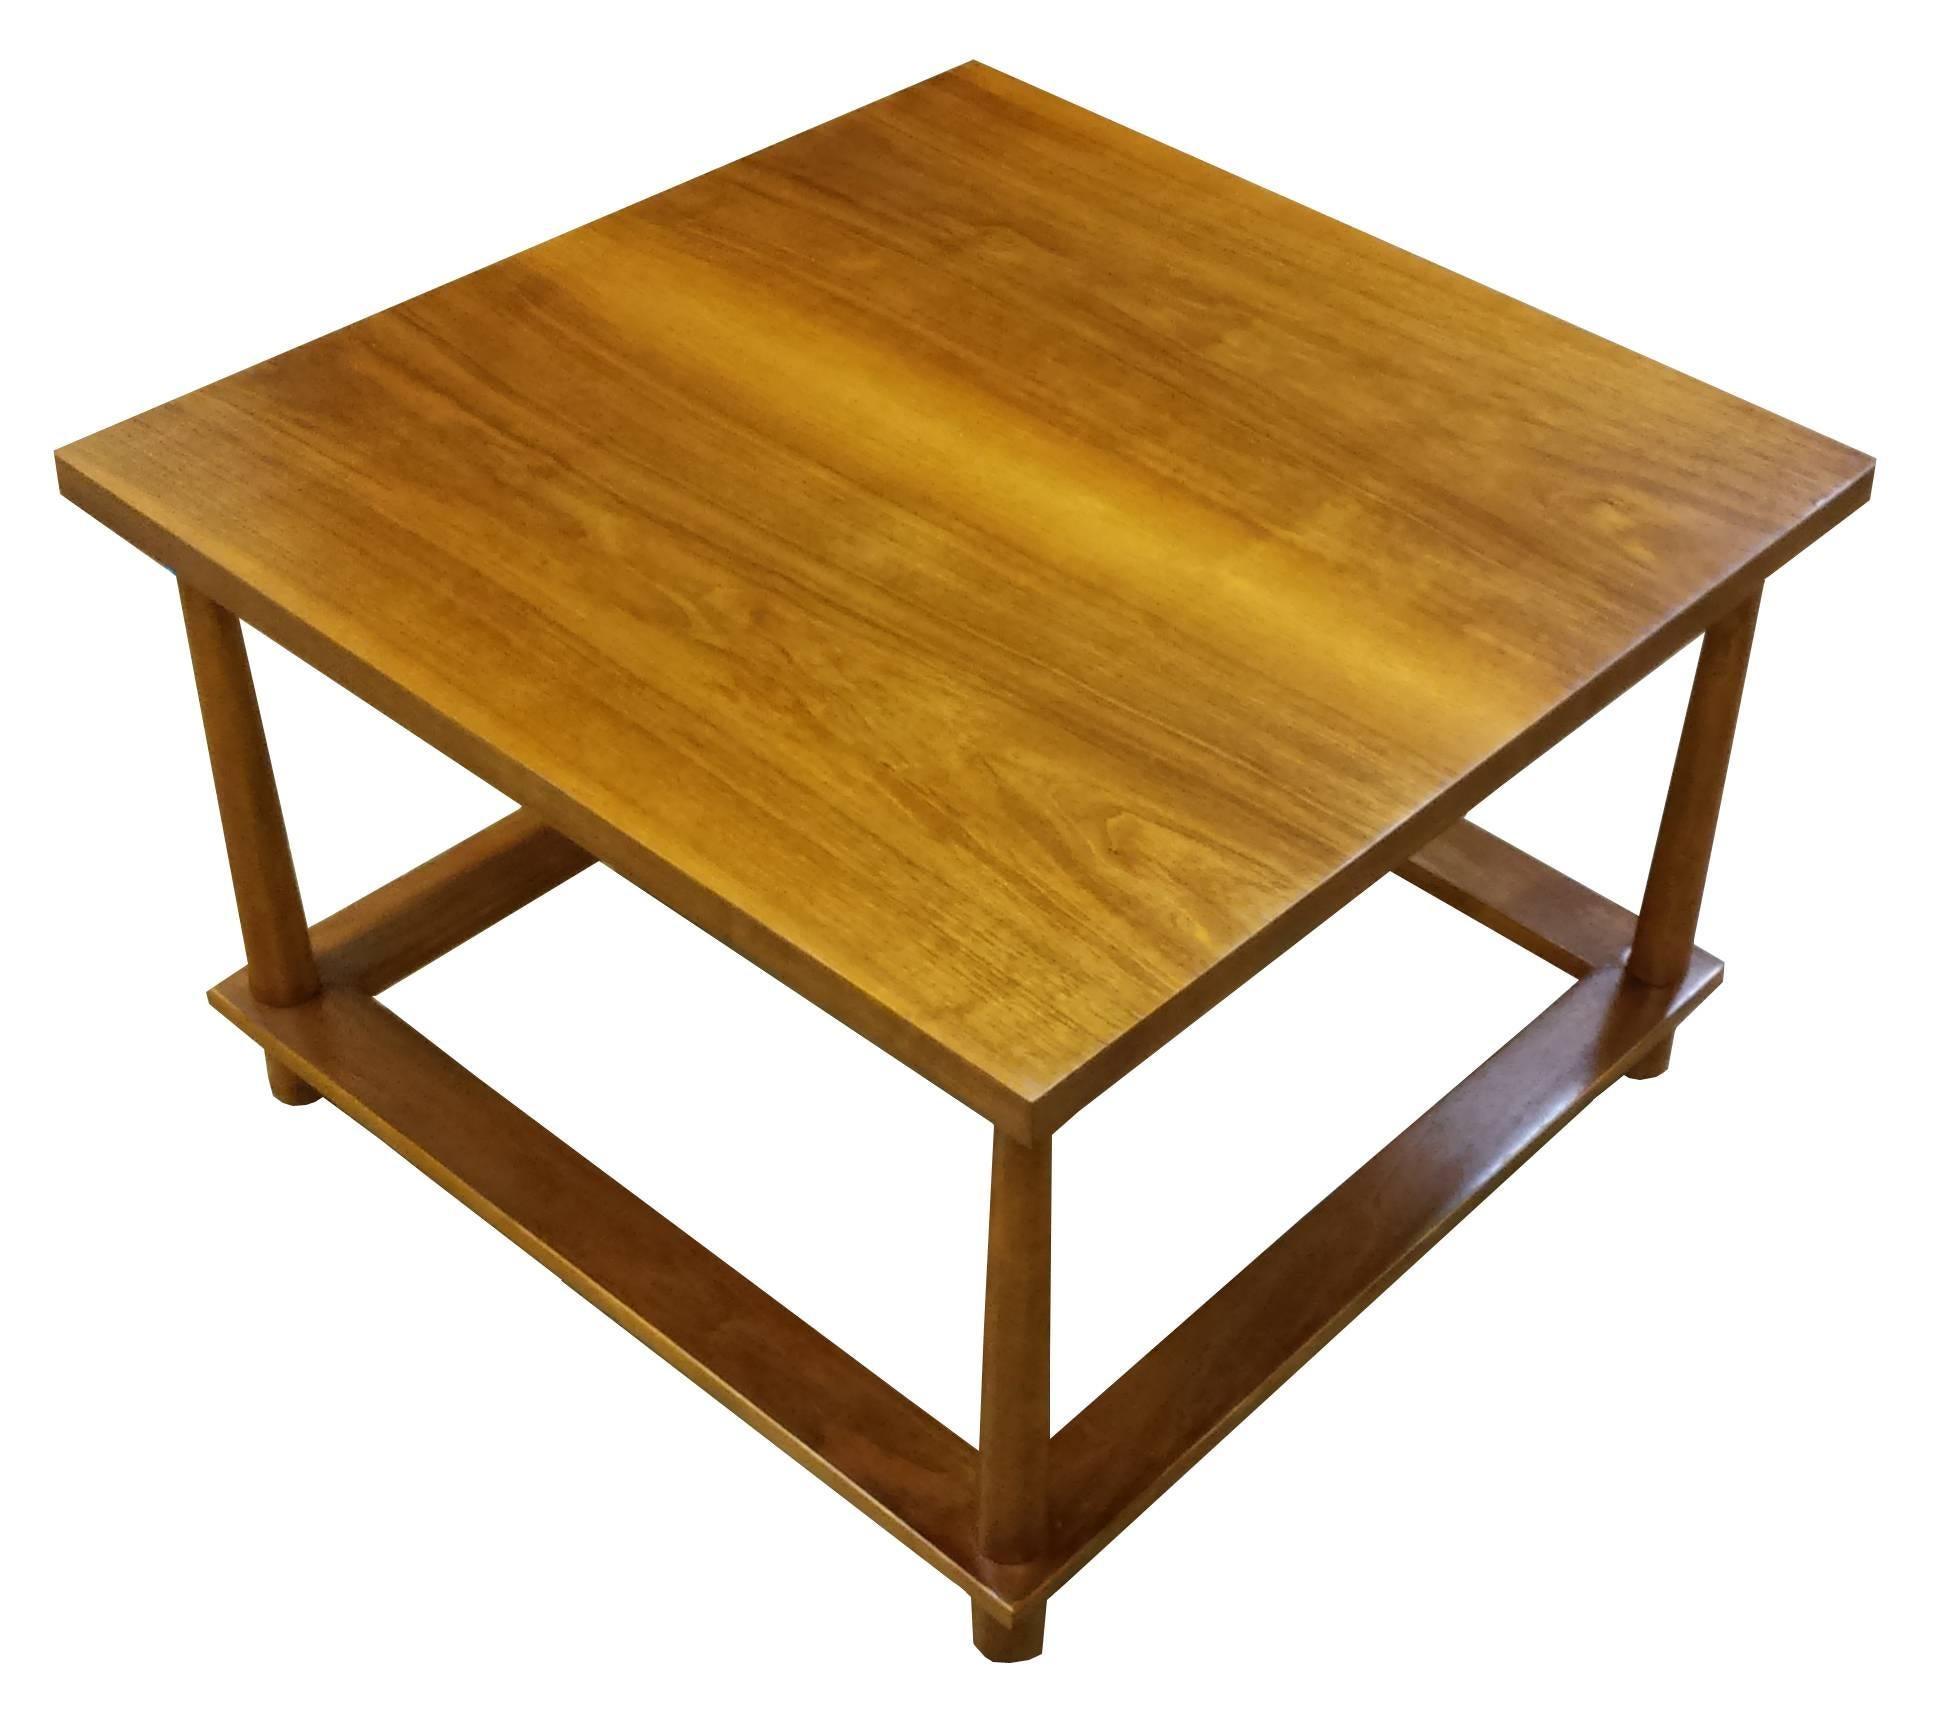 T.H. Robsjohn-Gibbings for Widdicomb side table in claro walnut. Very rare table with reverse tapered legs. Has been professionally restored and is in excellent condition. Matching coffee table is also available.